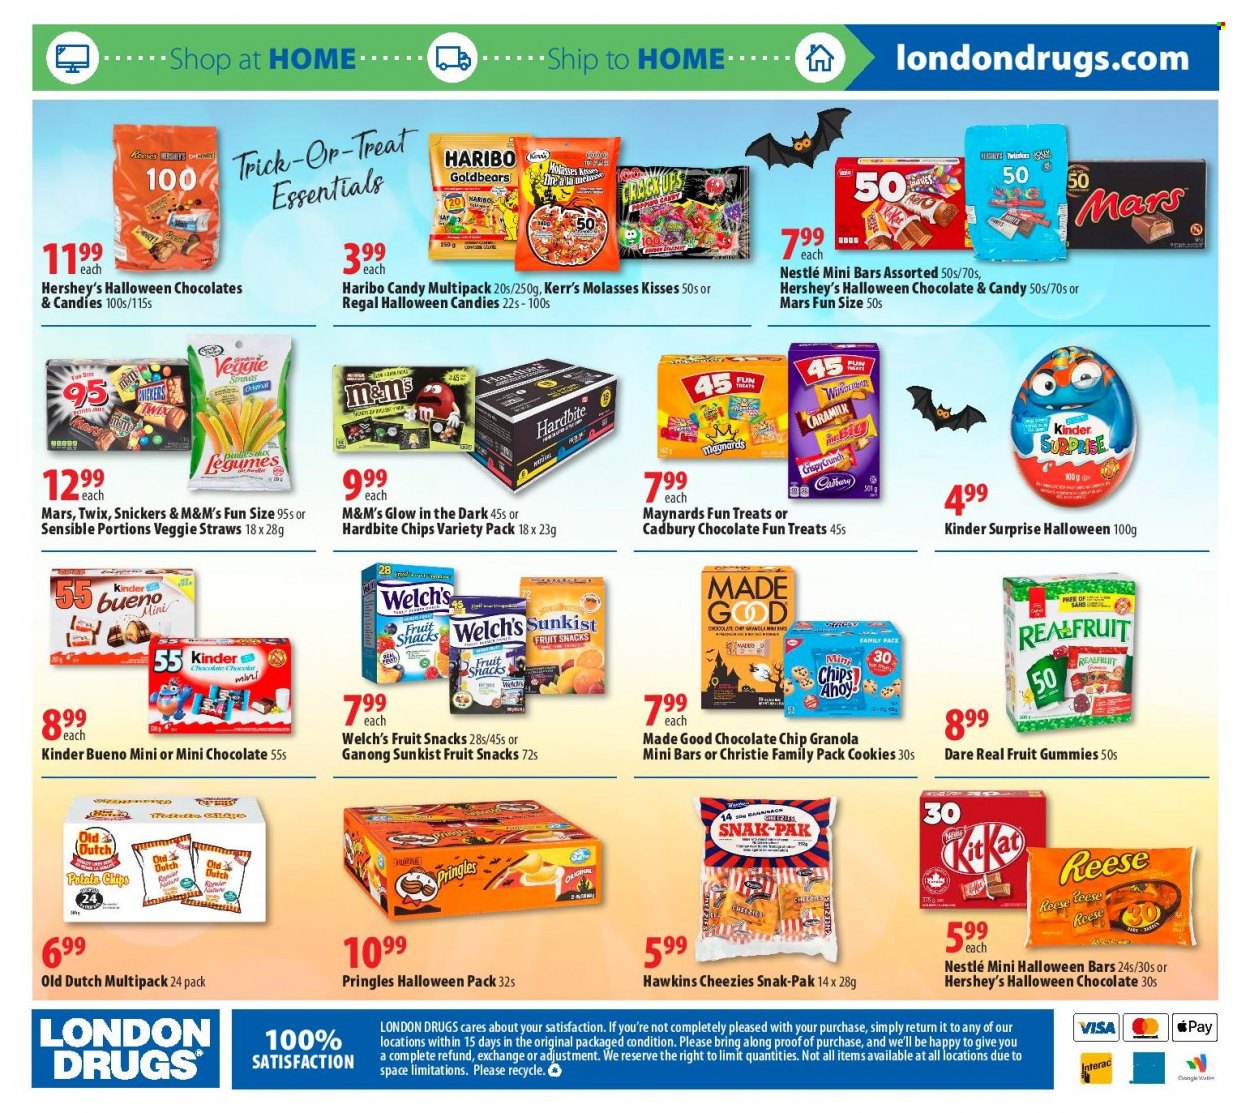 thumbnail - London Drugs Flyer - October 15, 2021 - October 20, 2021 - Sales products - cookies, Haribo, Snickers, Twix, Kinder Surprise, Mars, Hershey's, Kinder Bueno, Cadbury, Welch's, fruit snack, Pringles, veggie straws, molasses, Halloween, Nestlé, granola, chips, M&M's. Page 12.